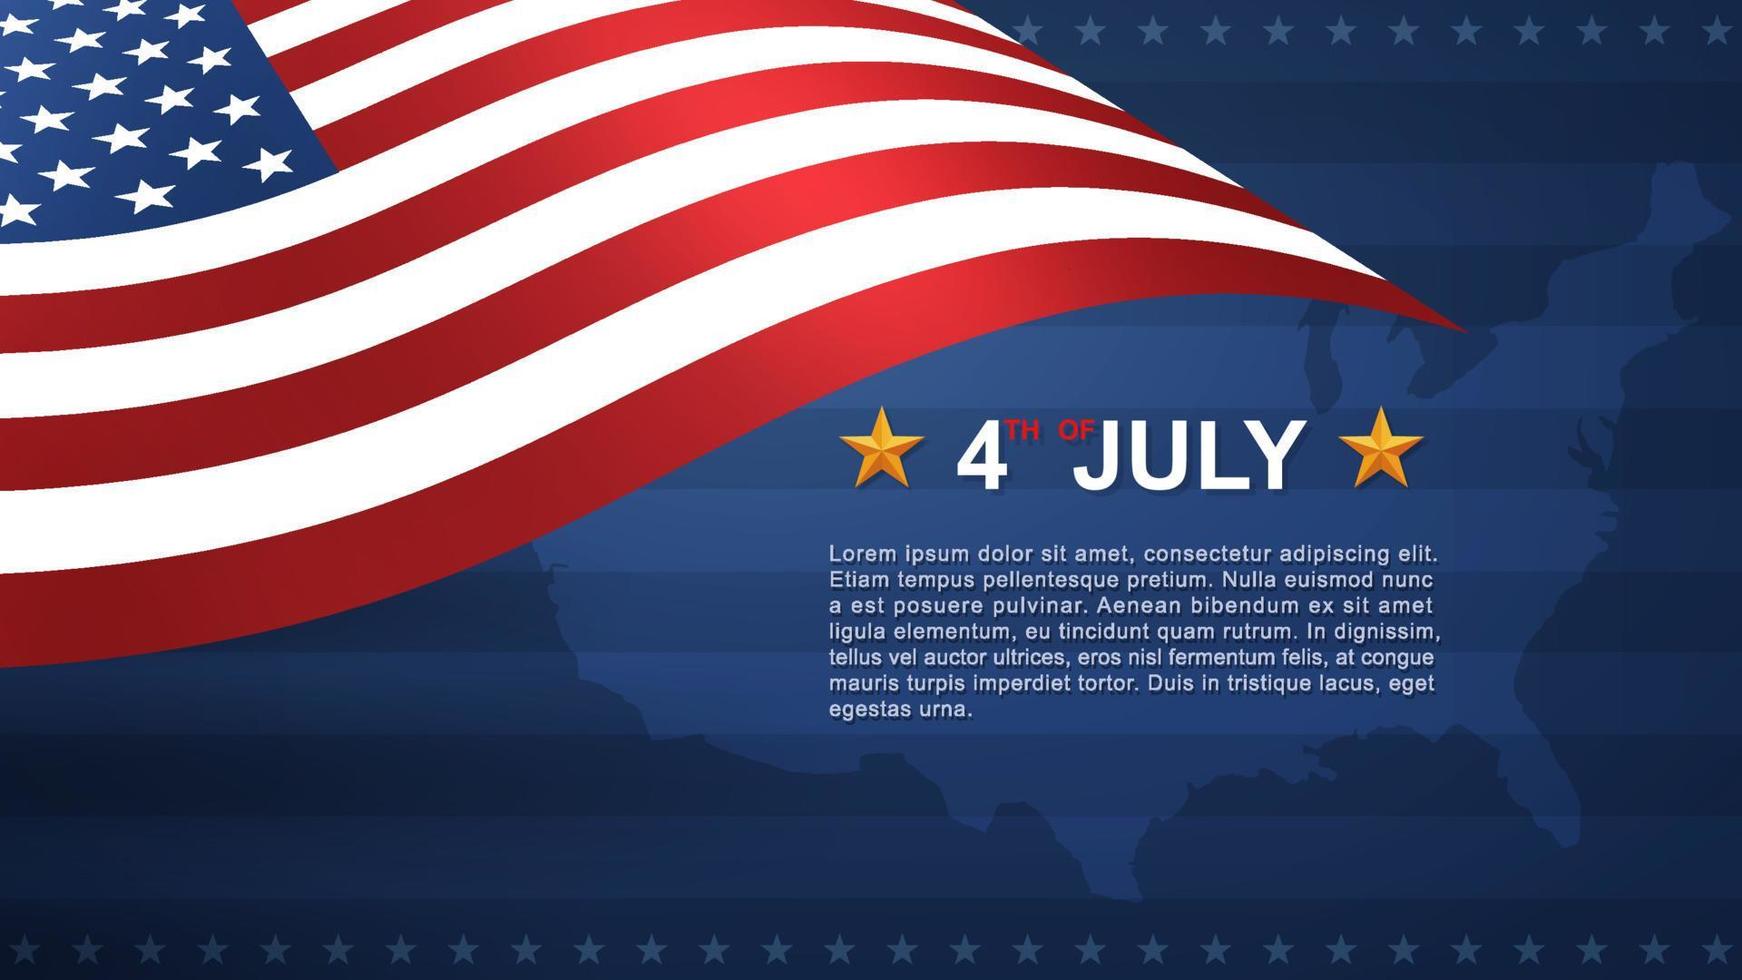 4th of July background for USA Independence Day with blue background and American flag. Vector. vector